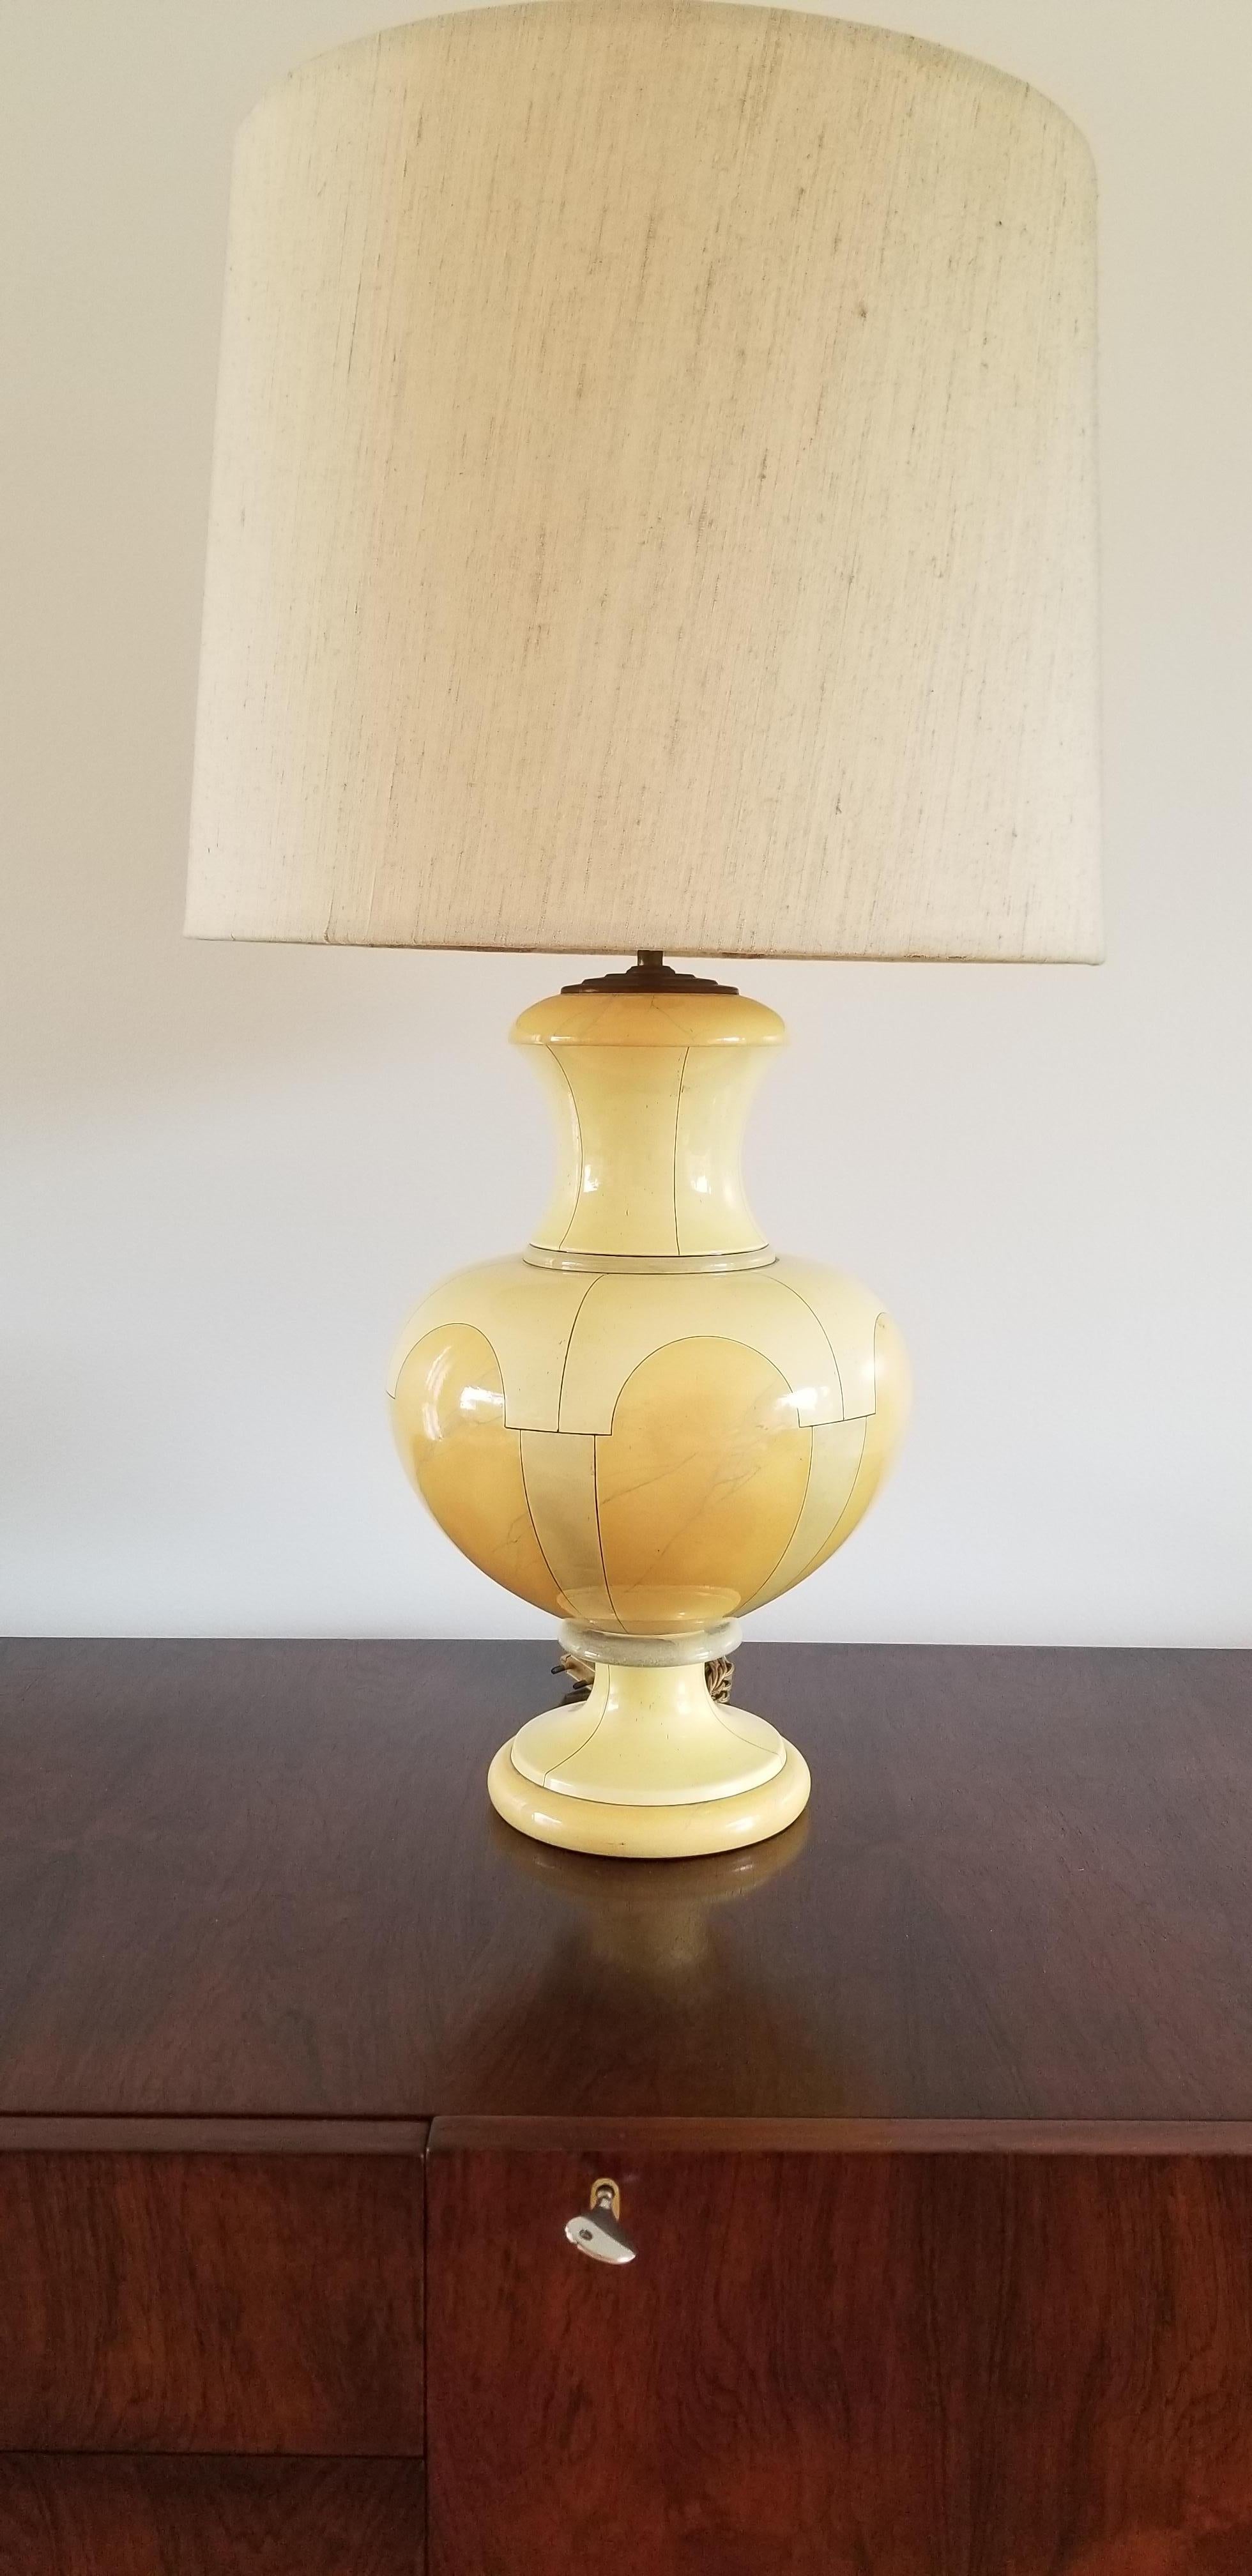 Elegant hand-painted ceramic lamp by Jean Roger
European socket and wiring
Minor quarter inch surface dent
This item will ship from Paris, France
Price does not include shipping and possible customs related charges
Sold without the shade
This